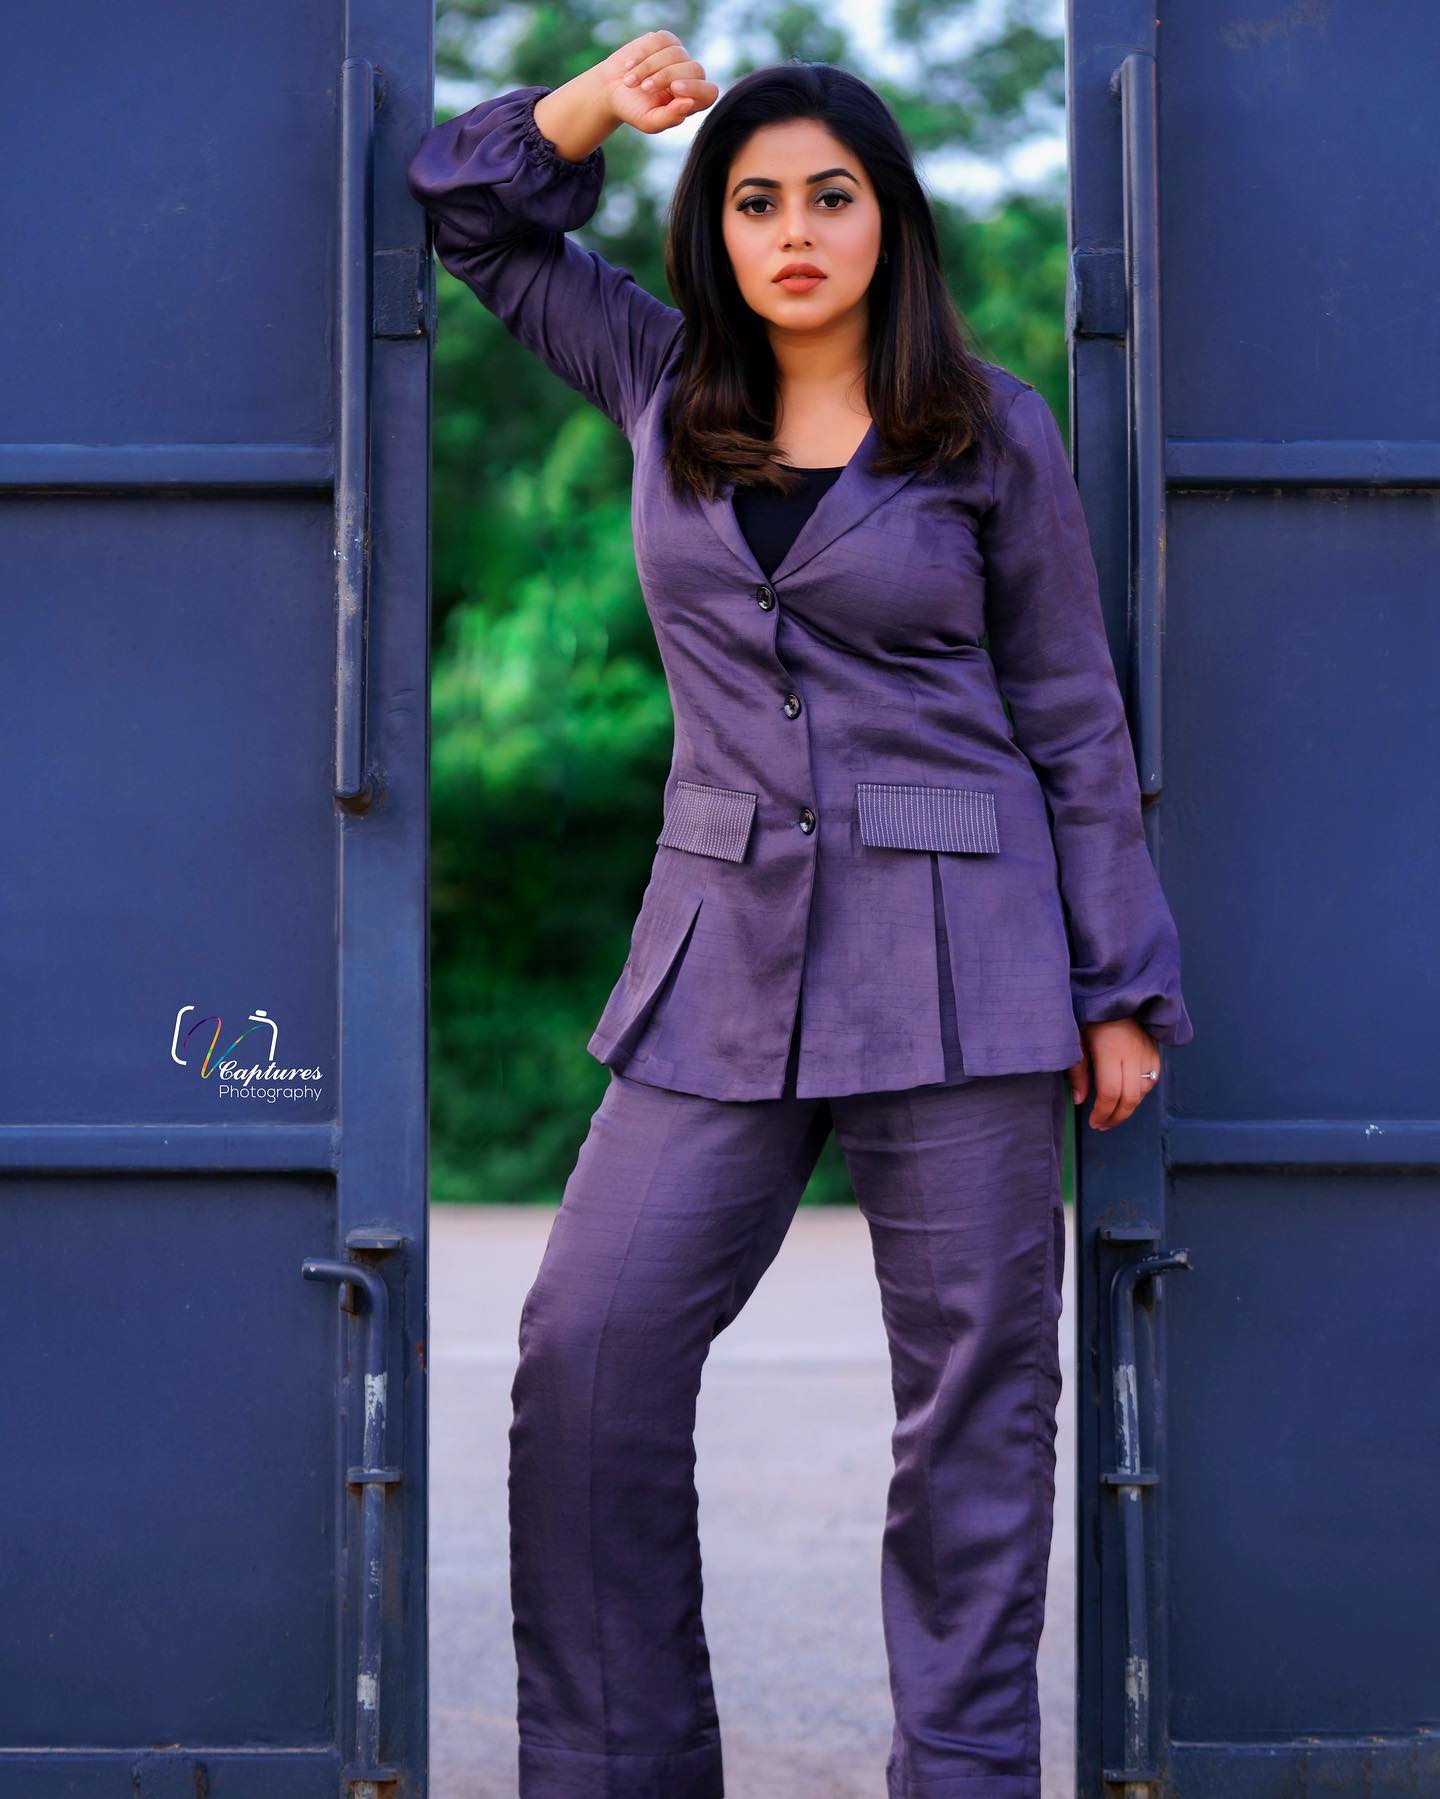 shamna-kasim-in-violet-coat-co-ord-with-decorated-collars-bell-bottoms-001